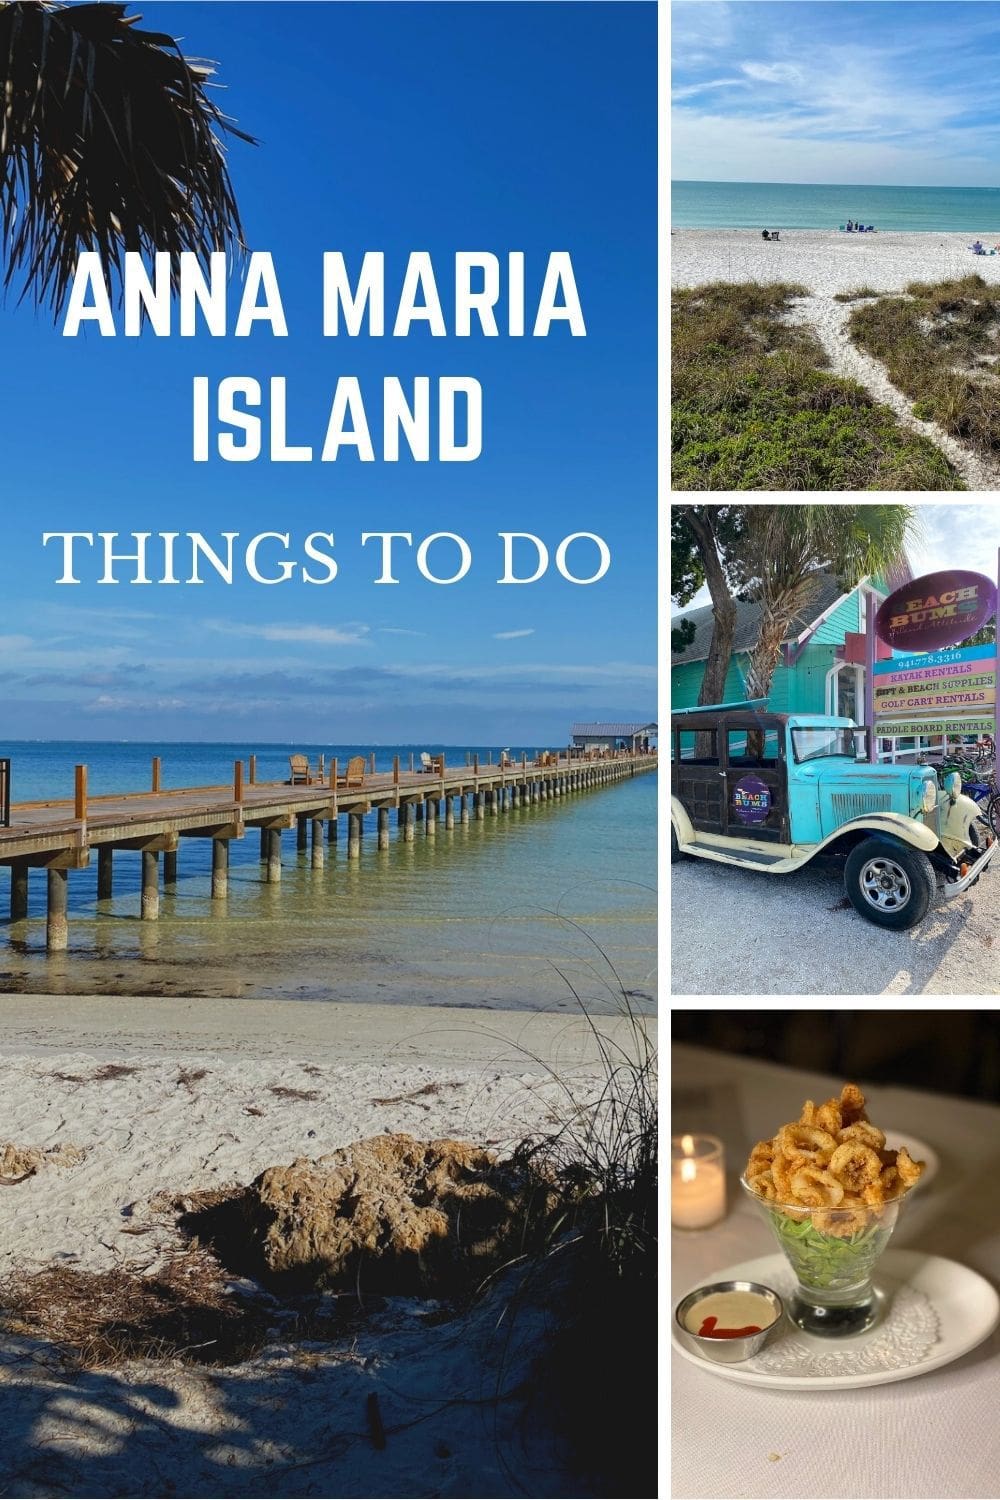 Things to do on Anna Maria Island on Pinterest.